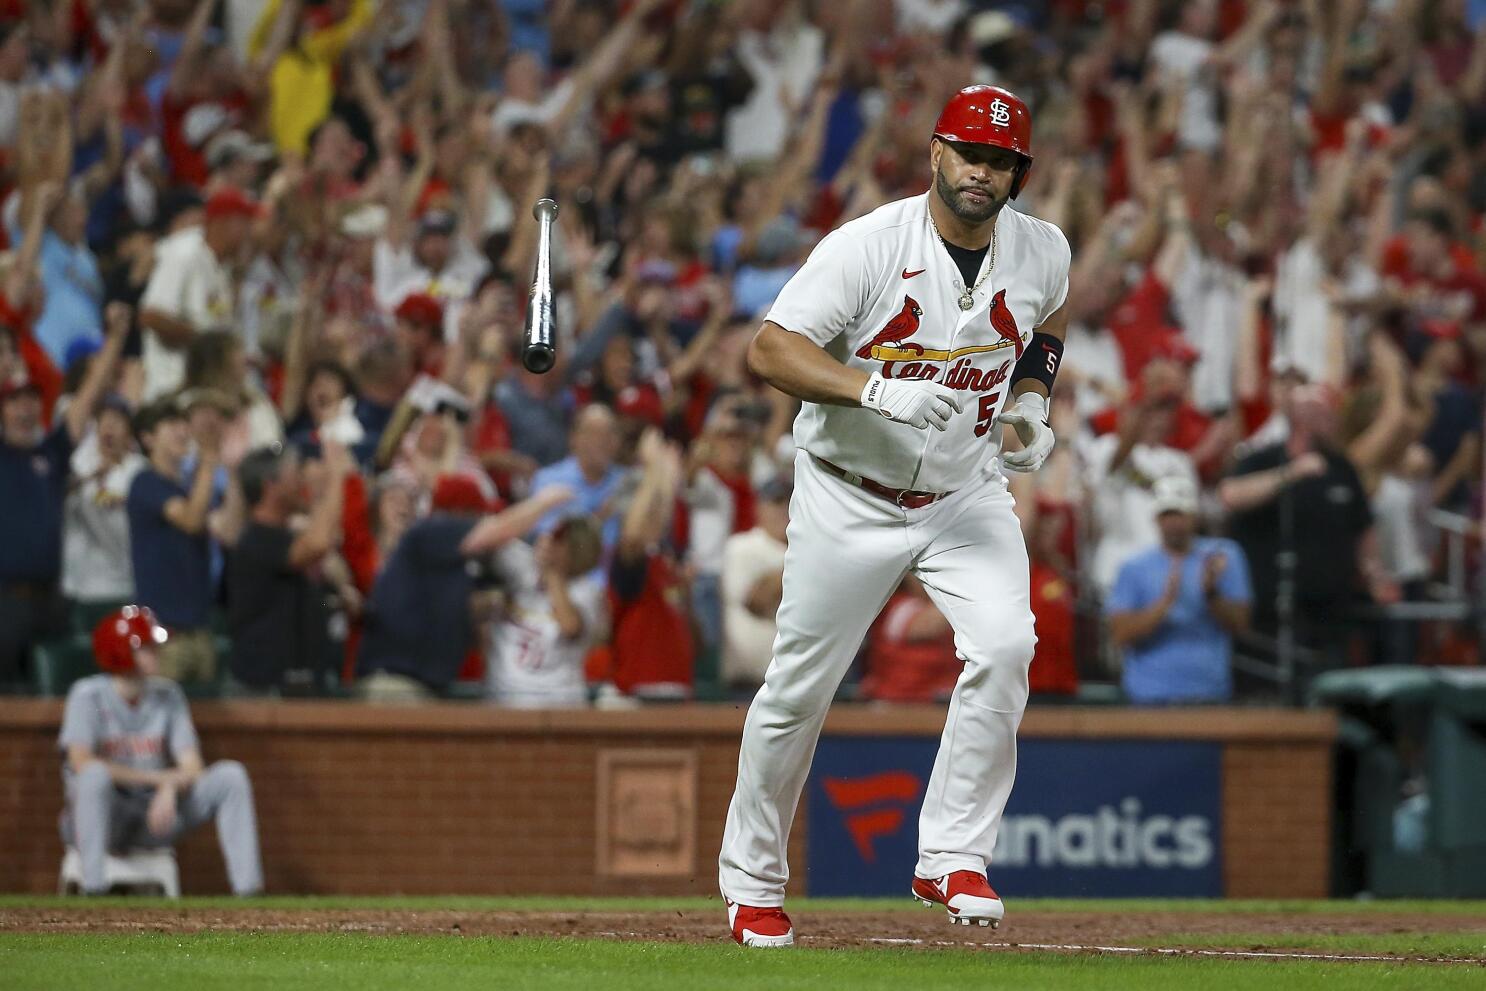 I'm going to try to enjoy it': Pujols swats 696th career homer in Cardinals'  win